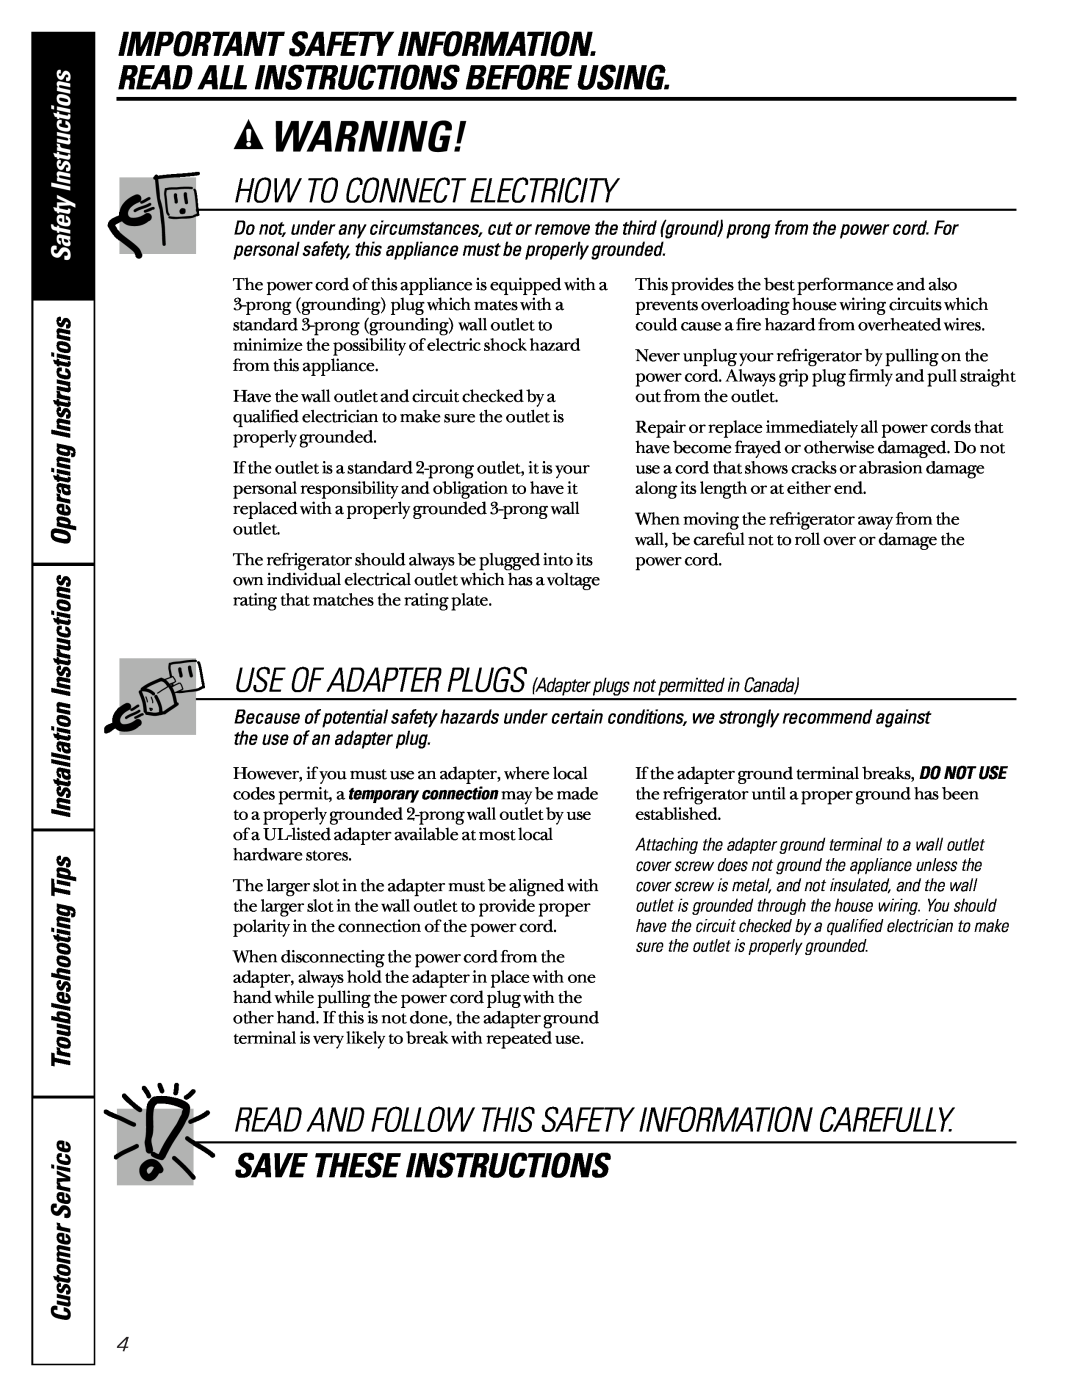 GE 49-60080 7-00 JR How To Connect Electricity, Save These Instructions, OperatingInstructions, TroubleshootingTips 